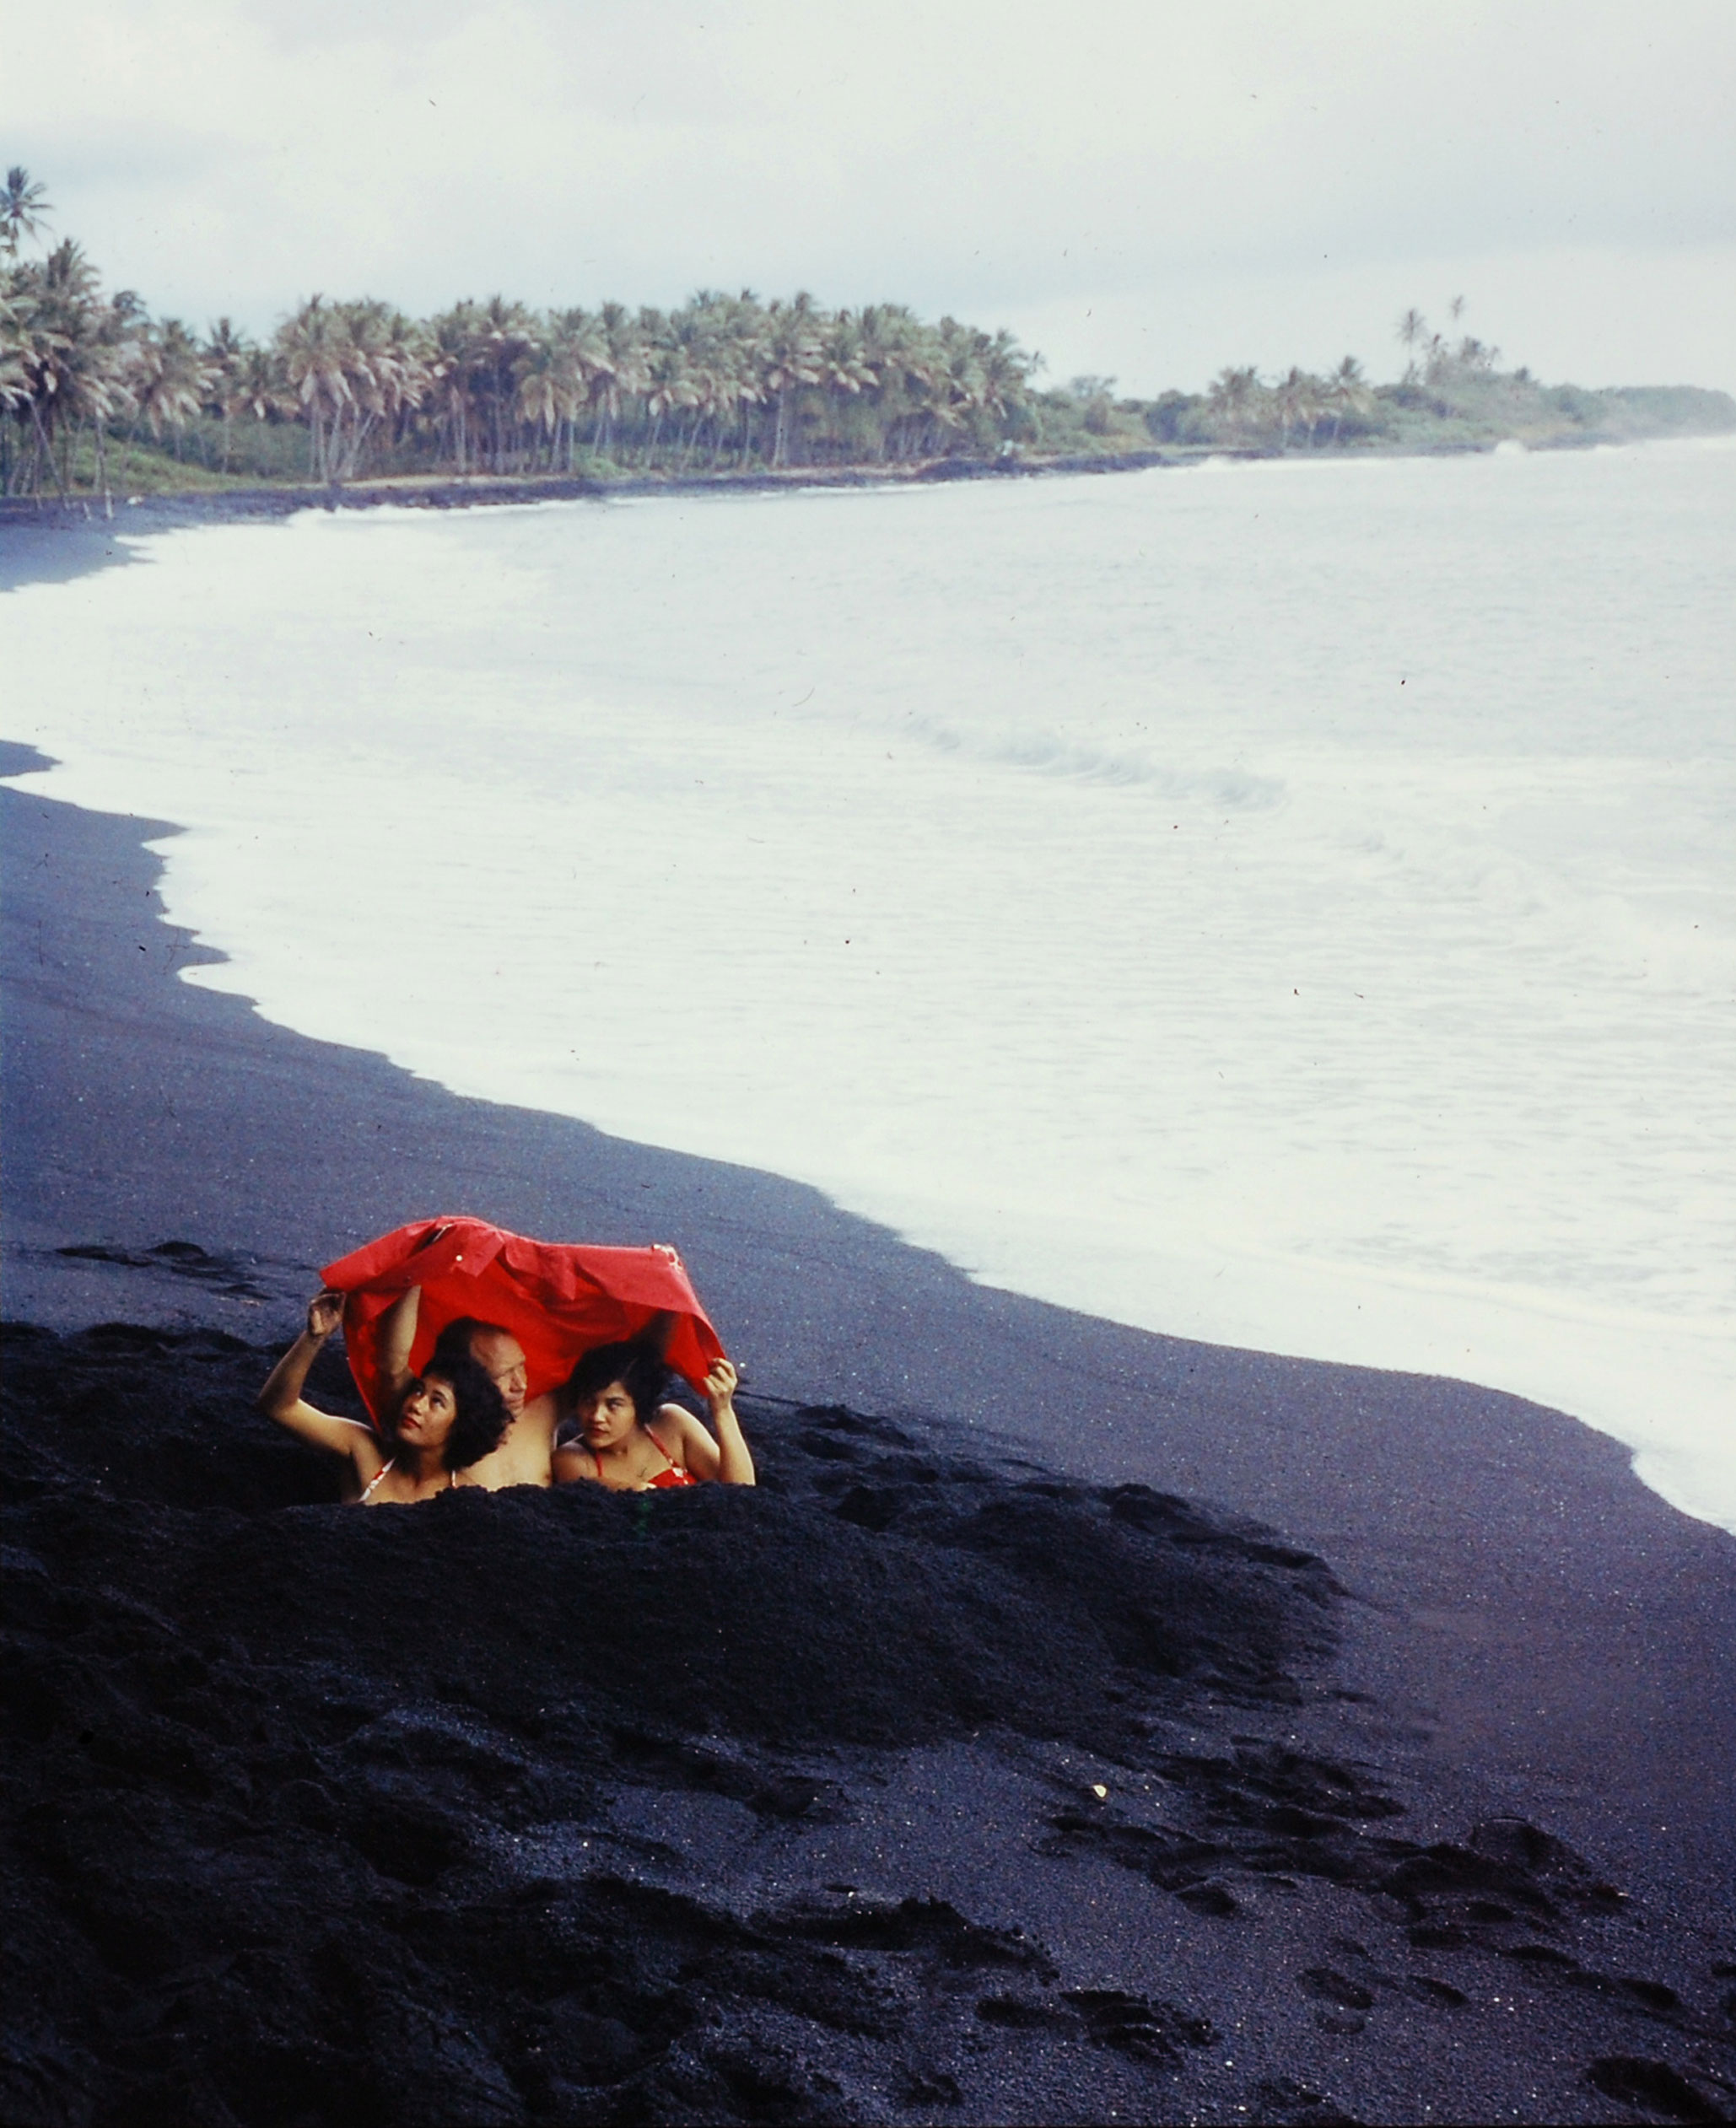 Black-sand beach, made by waves battering volcanic rock, on the Big Island, Hawaii, 1959.